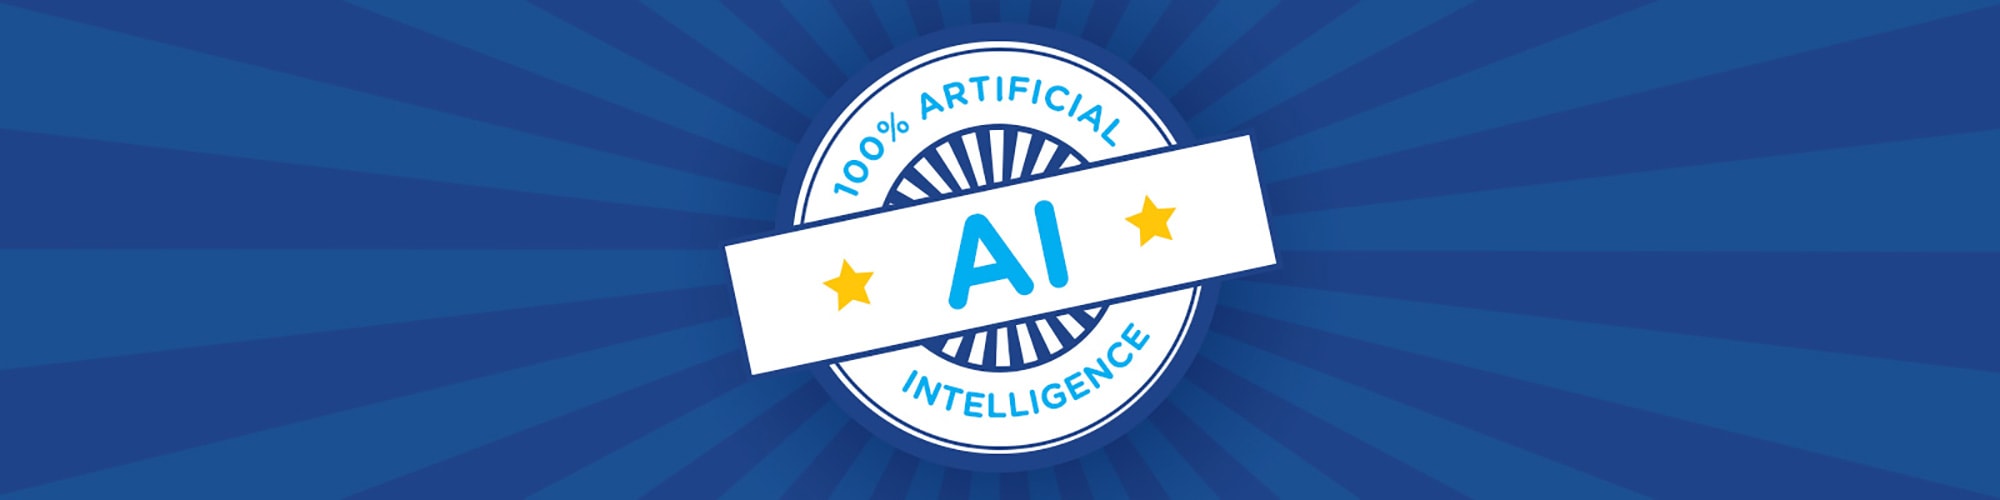 100% Artificial Intelligence